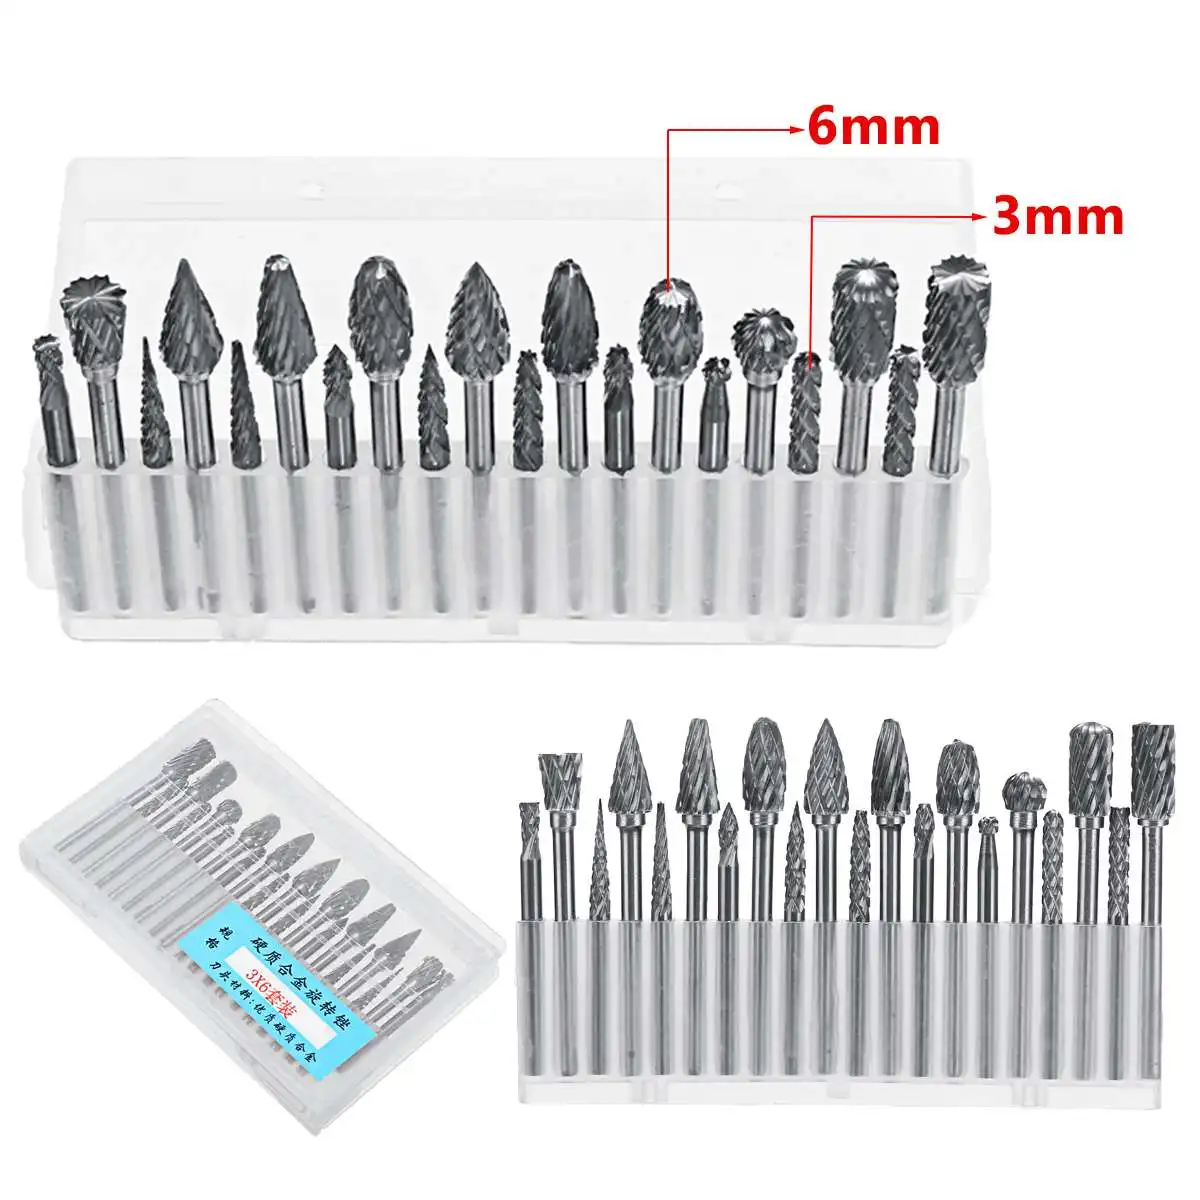 20Pcs Carbide Rotary Rasp Burrs Drill Bit Tungsten Steel Double Cut Files Grinder Shank Electric Grinder Replacement Accessories